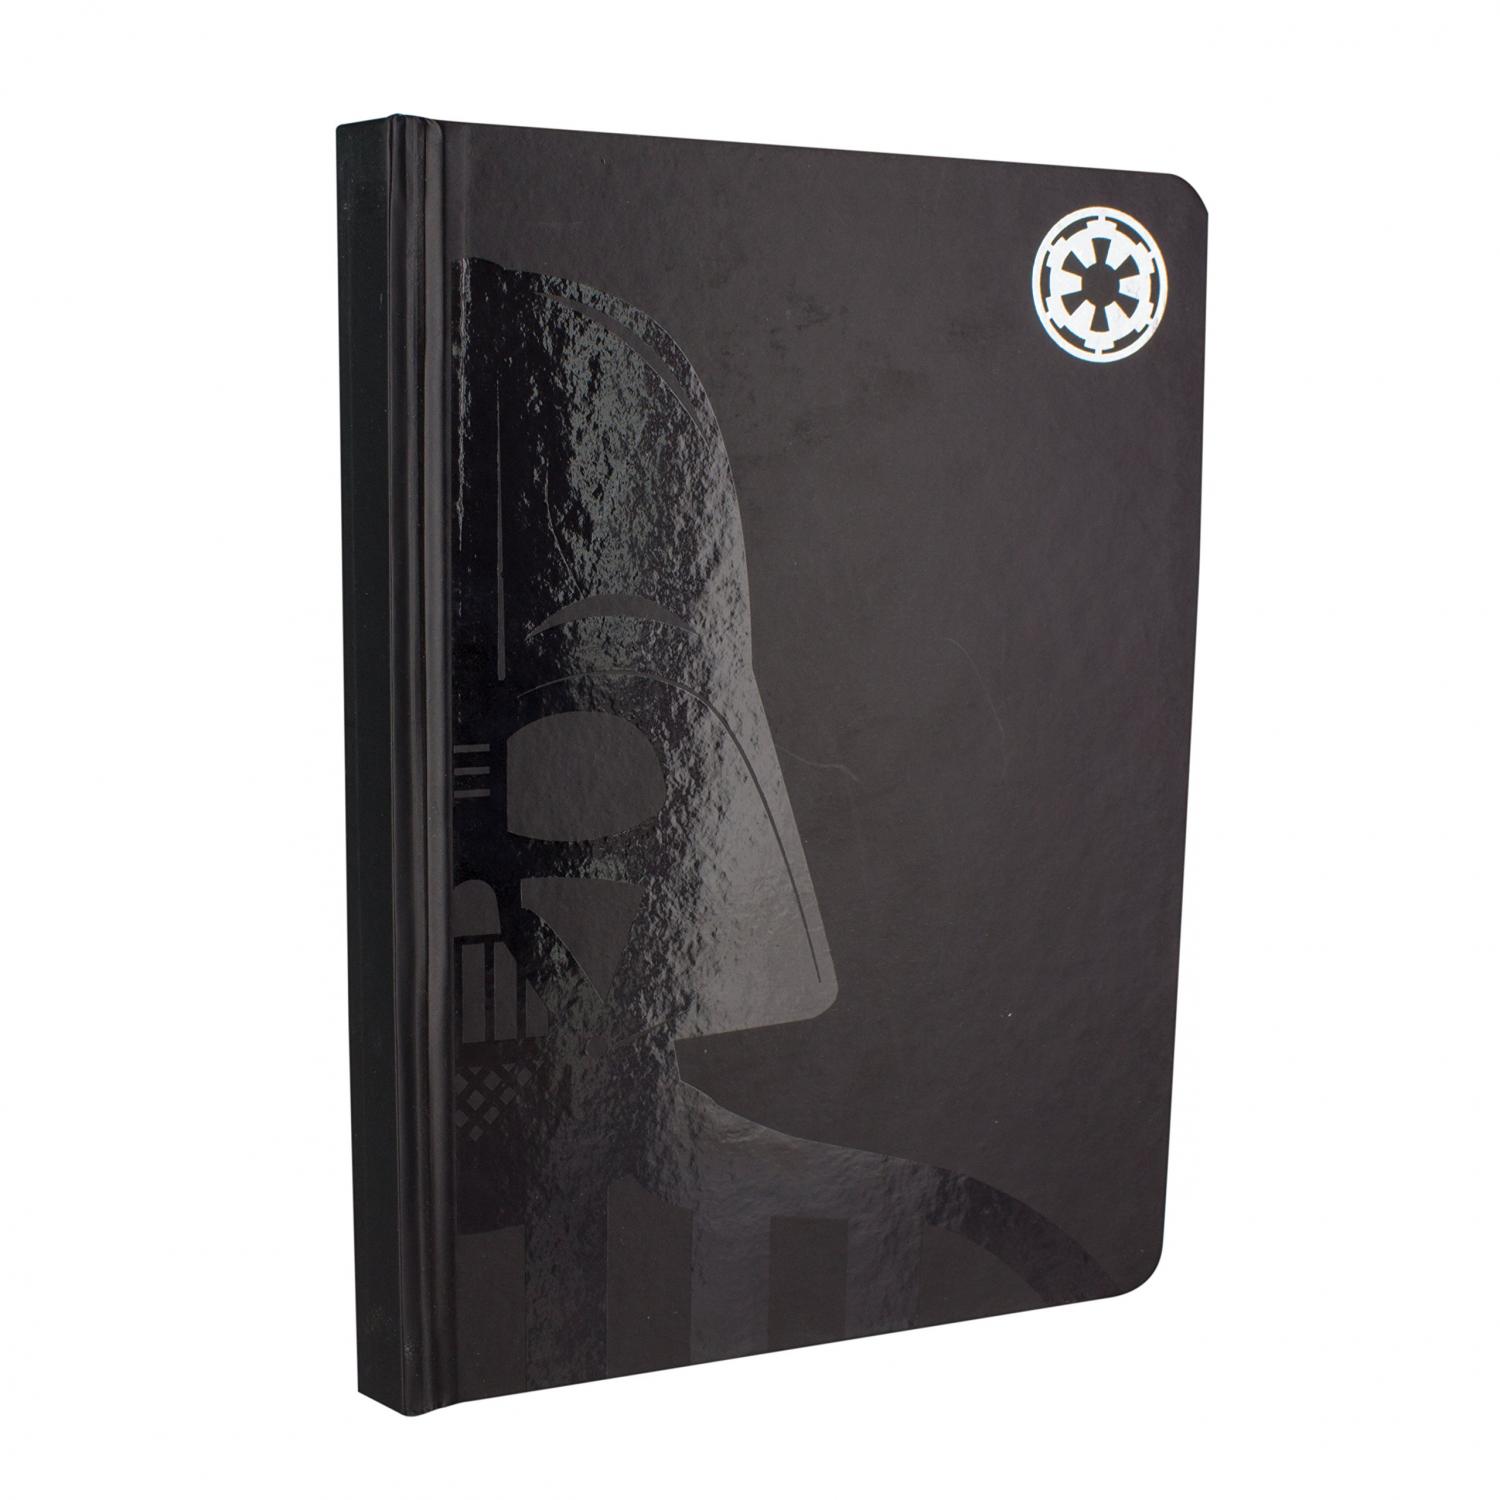 Star Wars - Darth Vader Notebook Official 200 Lined Page